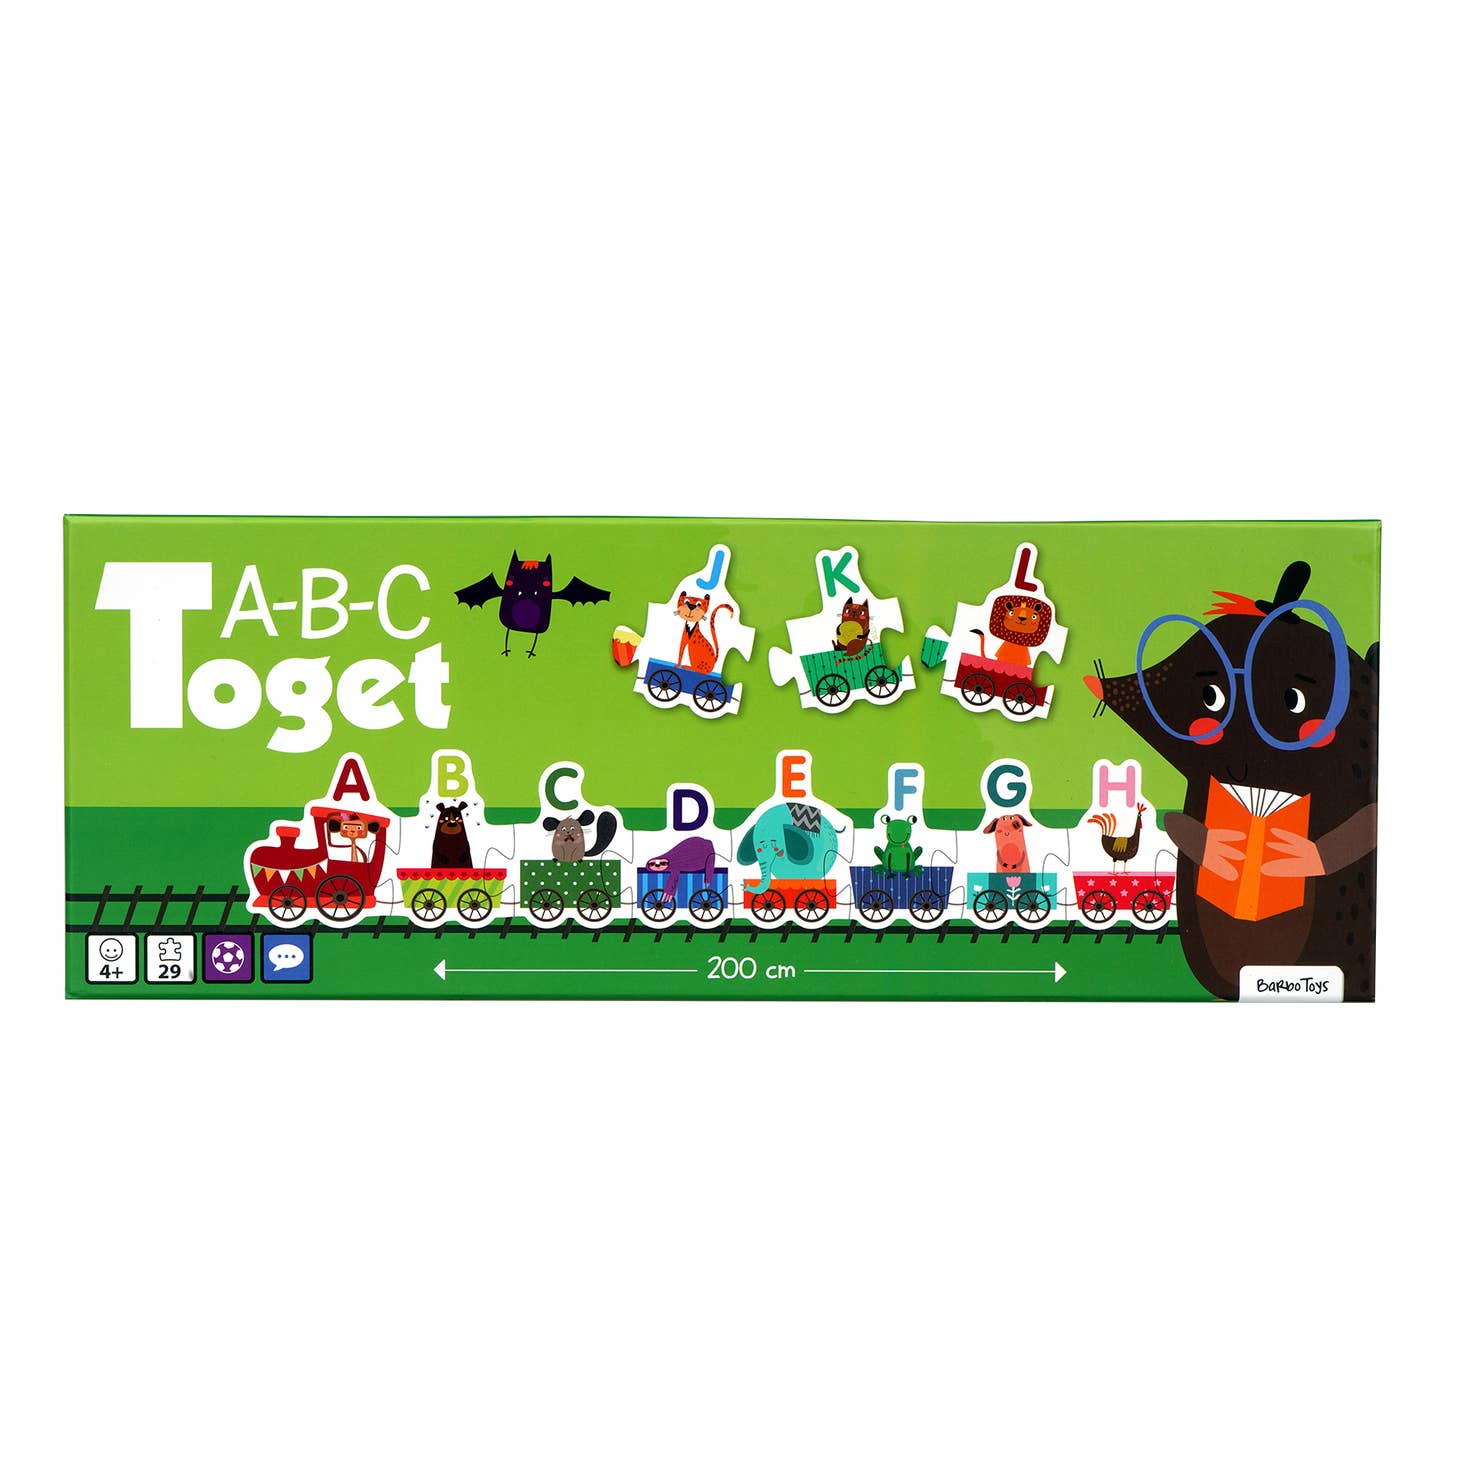 A-å Alfabettoget Puslespill (ABC Animal Train Puzzle) fra Barbo Toys